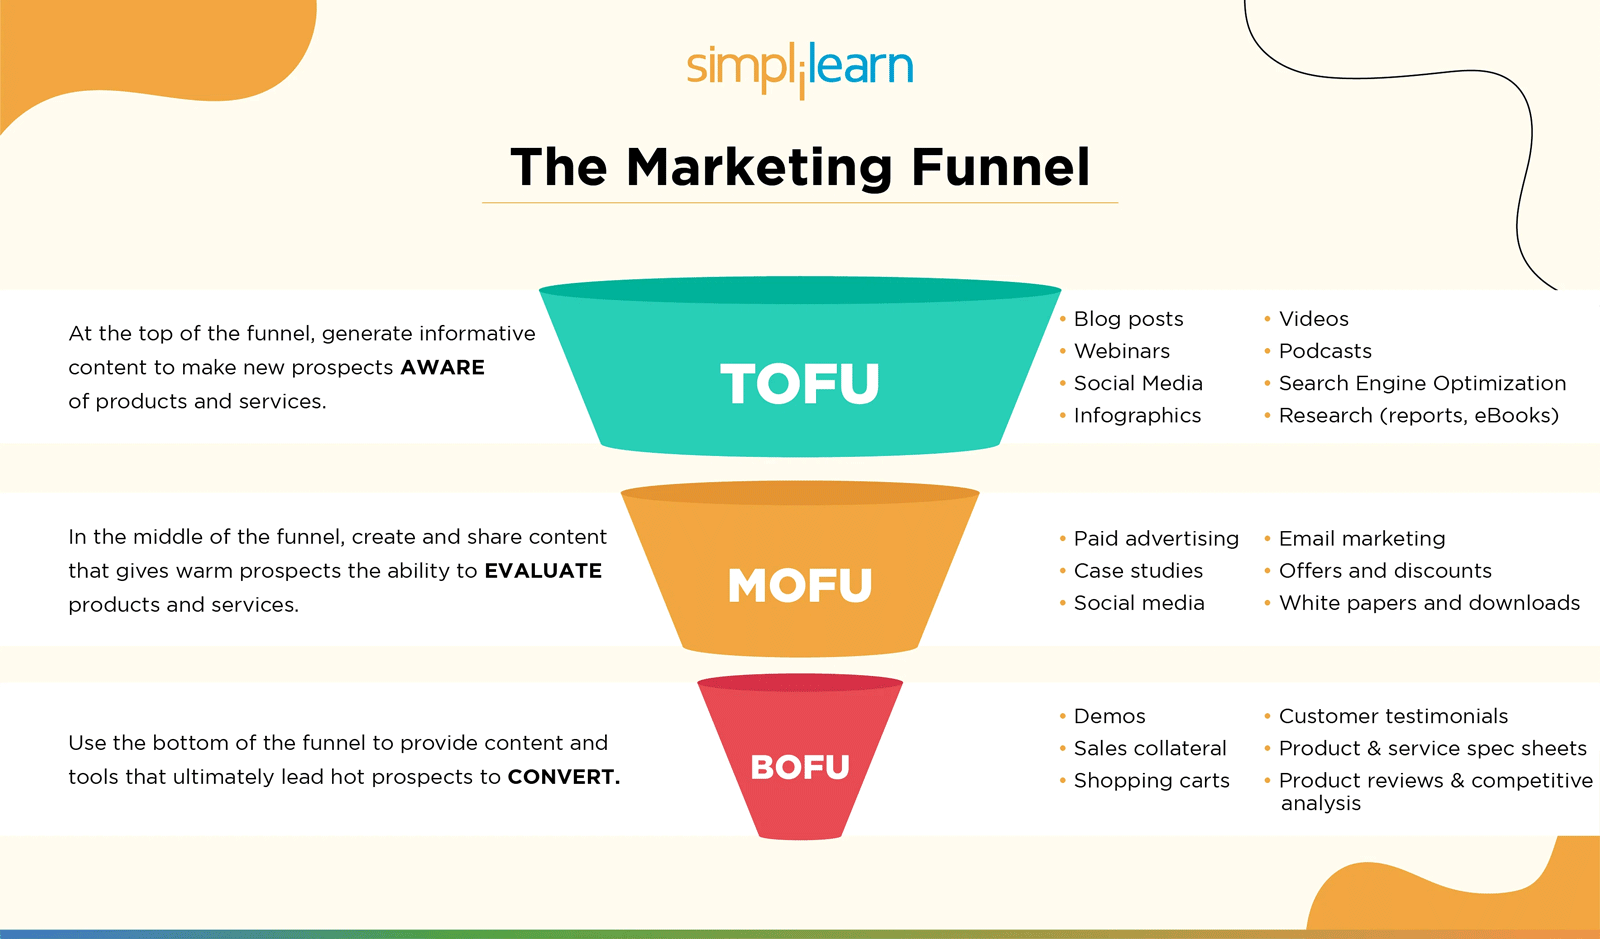 What is Top of the Funnel (TOFU)?